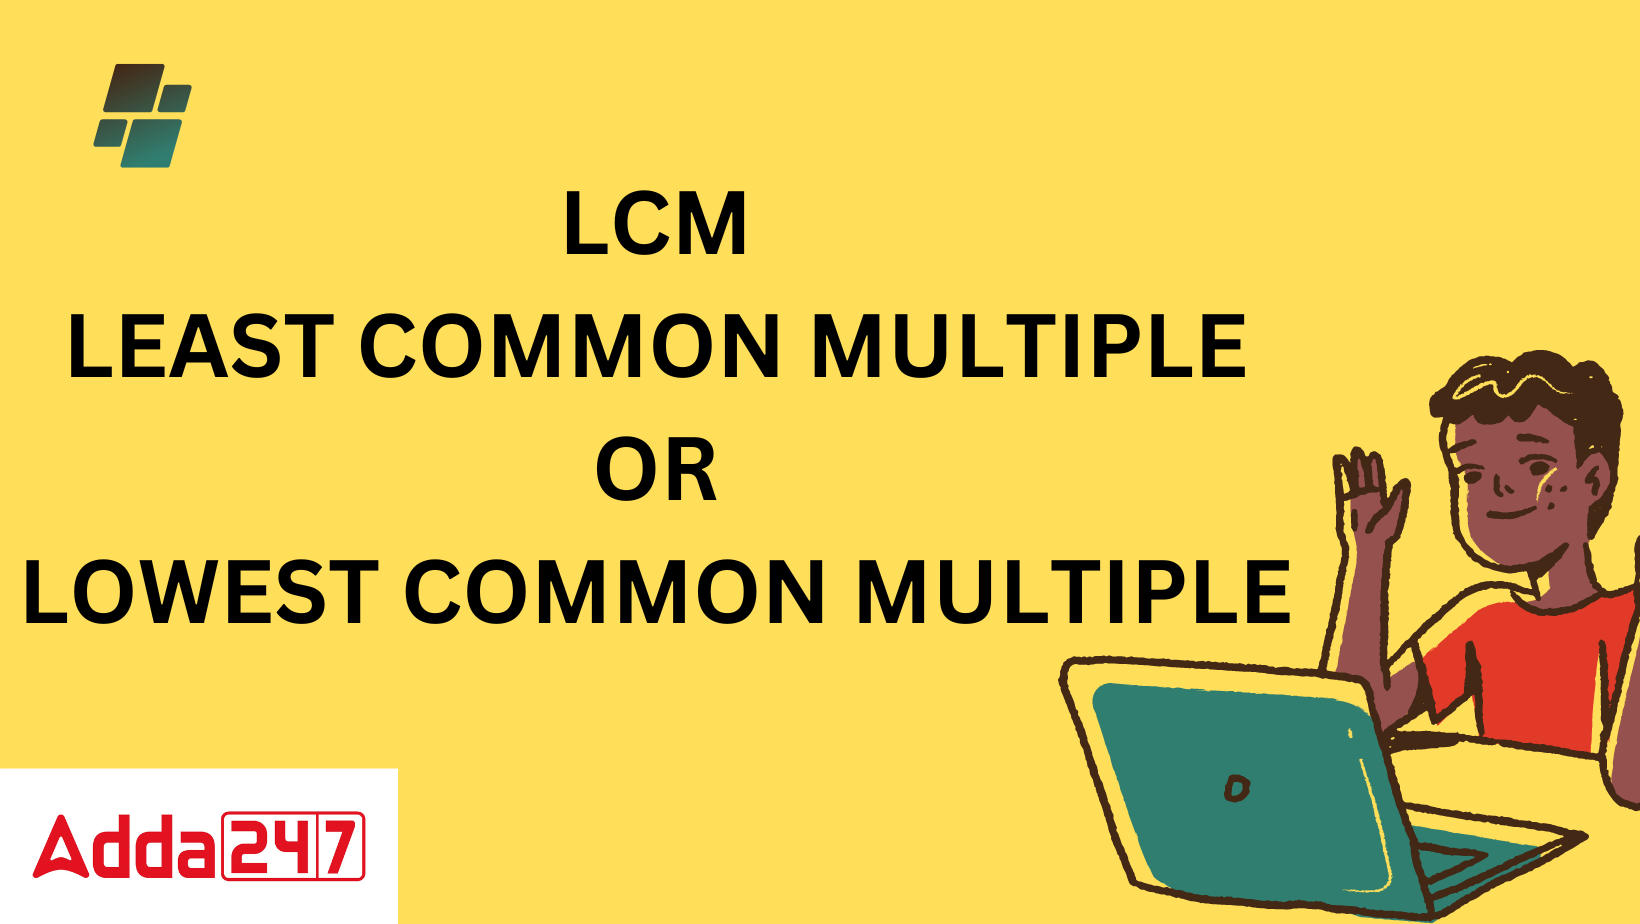 LCM LEAST COMMON MULTIPLE OR LOWEST COMMON MULTIPLE